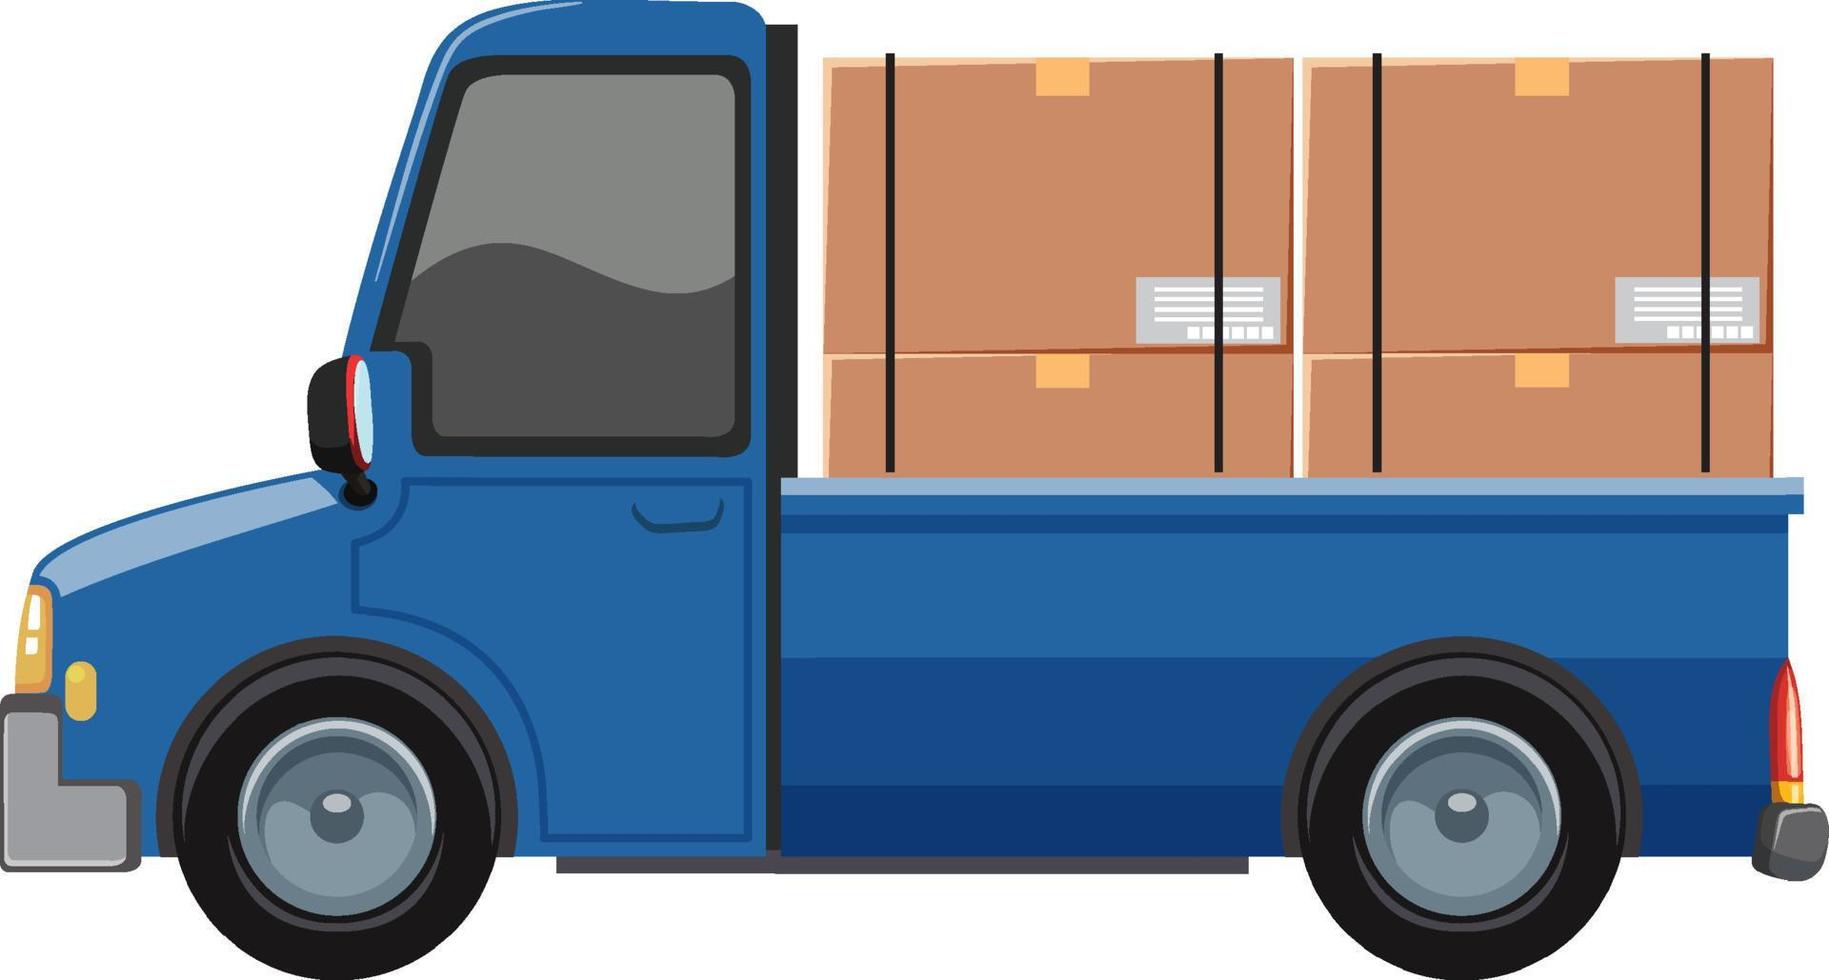 Delivery truck with packages vector